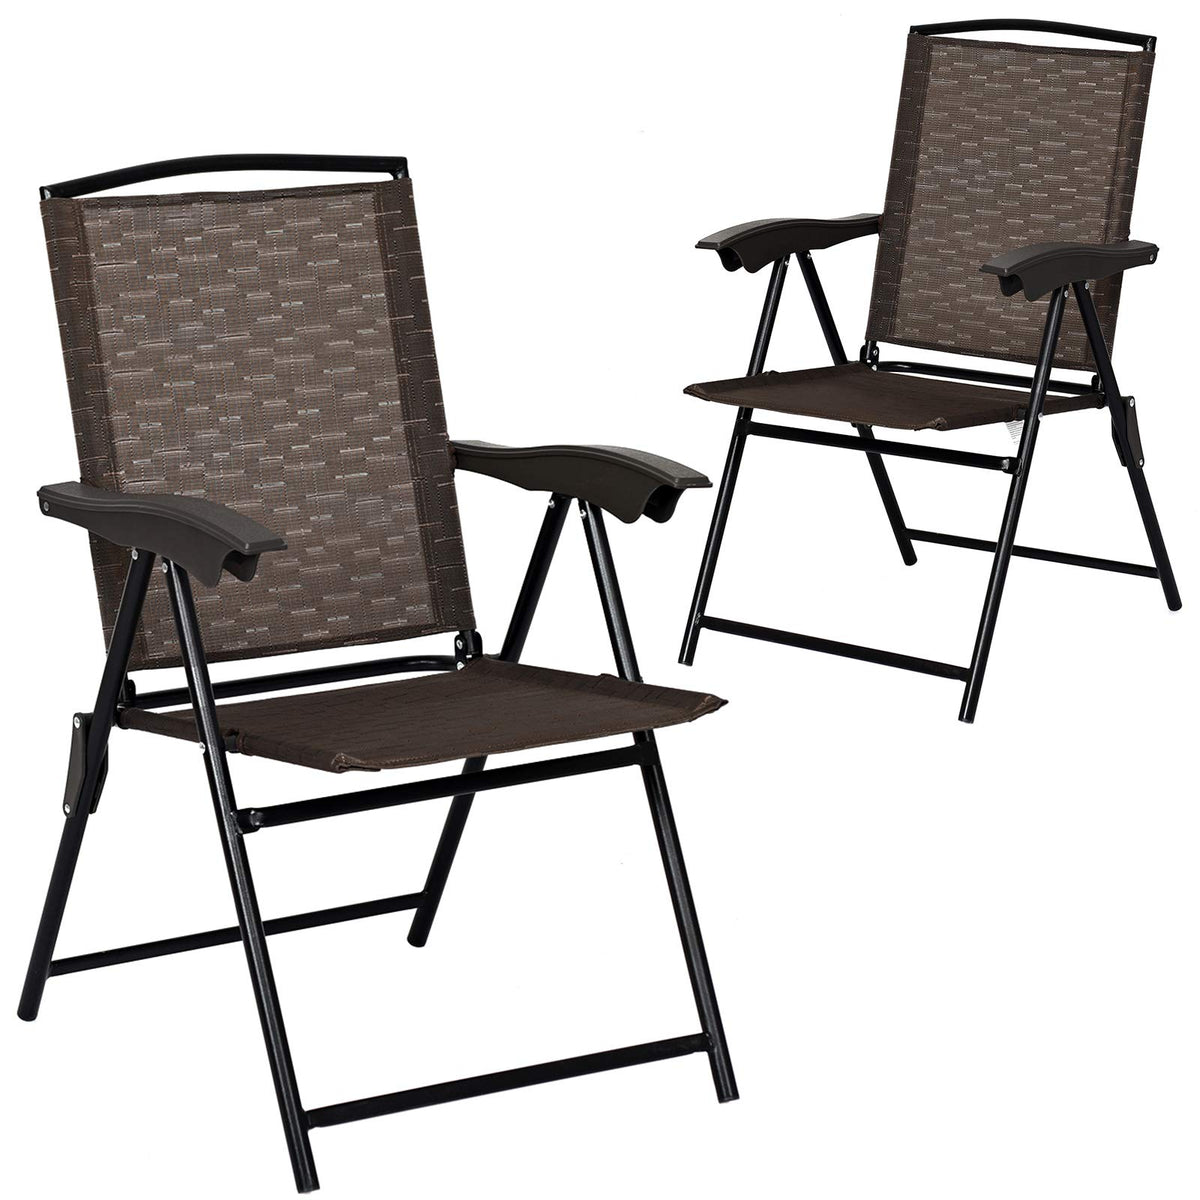 Folding Sling Chairs Sets of 2, Portable Chairs for Patio Garden Pool Outdoor & Indoor - GoplusUS